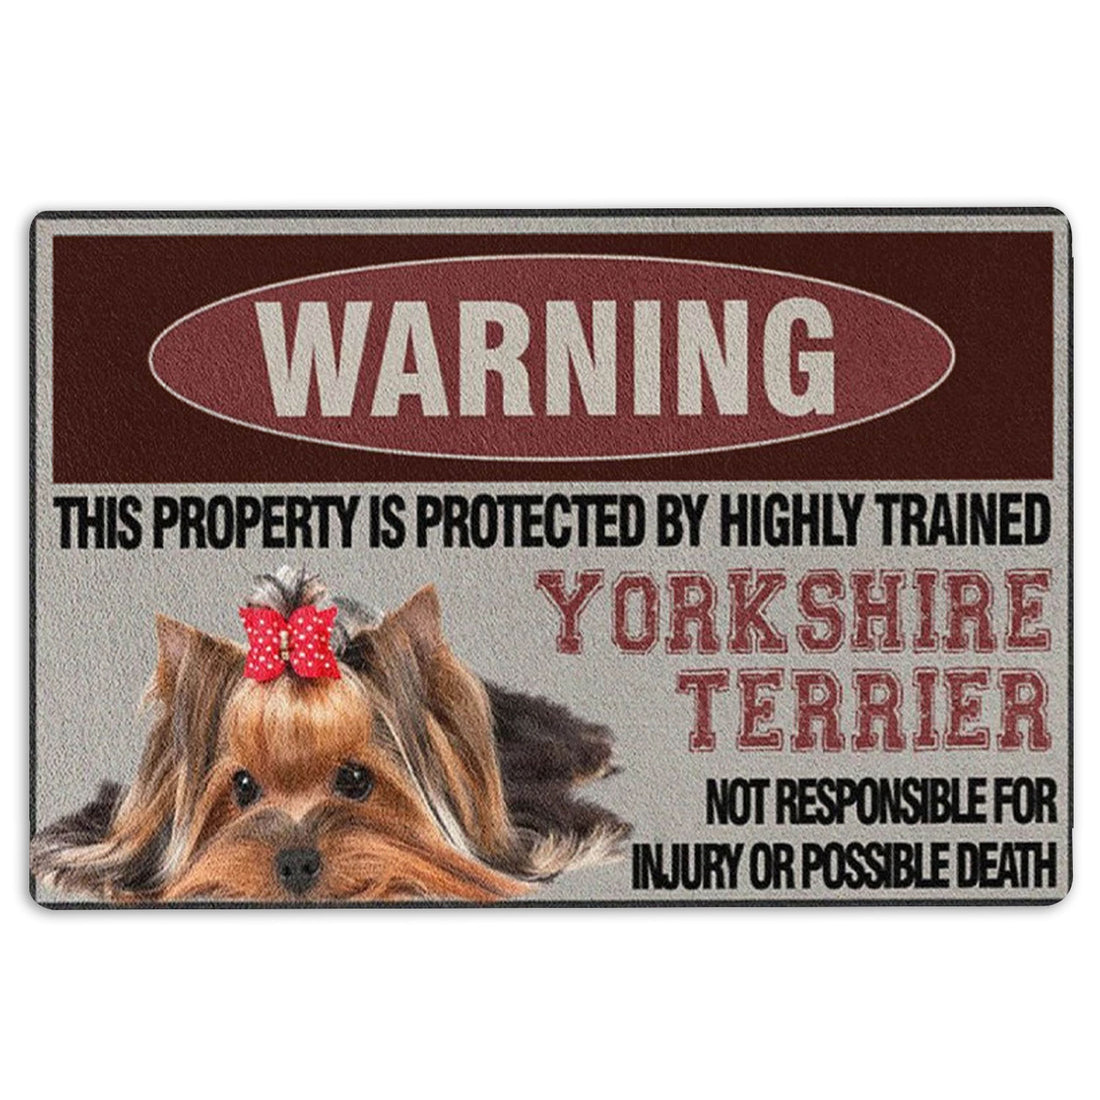 Ohaprints-Doormat-Outdoor-Indoor-This-Property-Is-Protected-By-A-Highly-Trained-Yorkshire-Terrier-Rubber-Door-Mat-1356-18'' x 30''